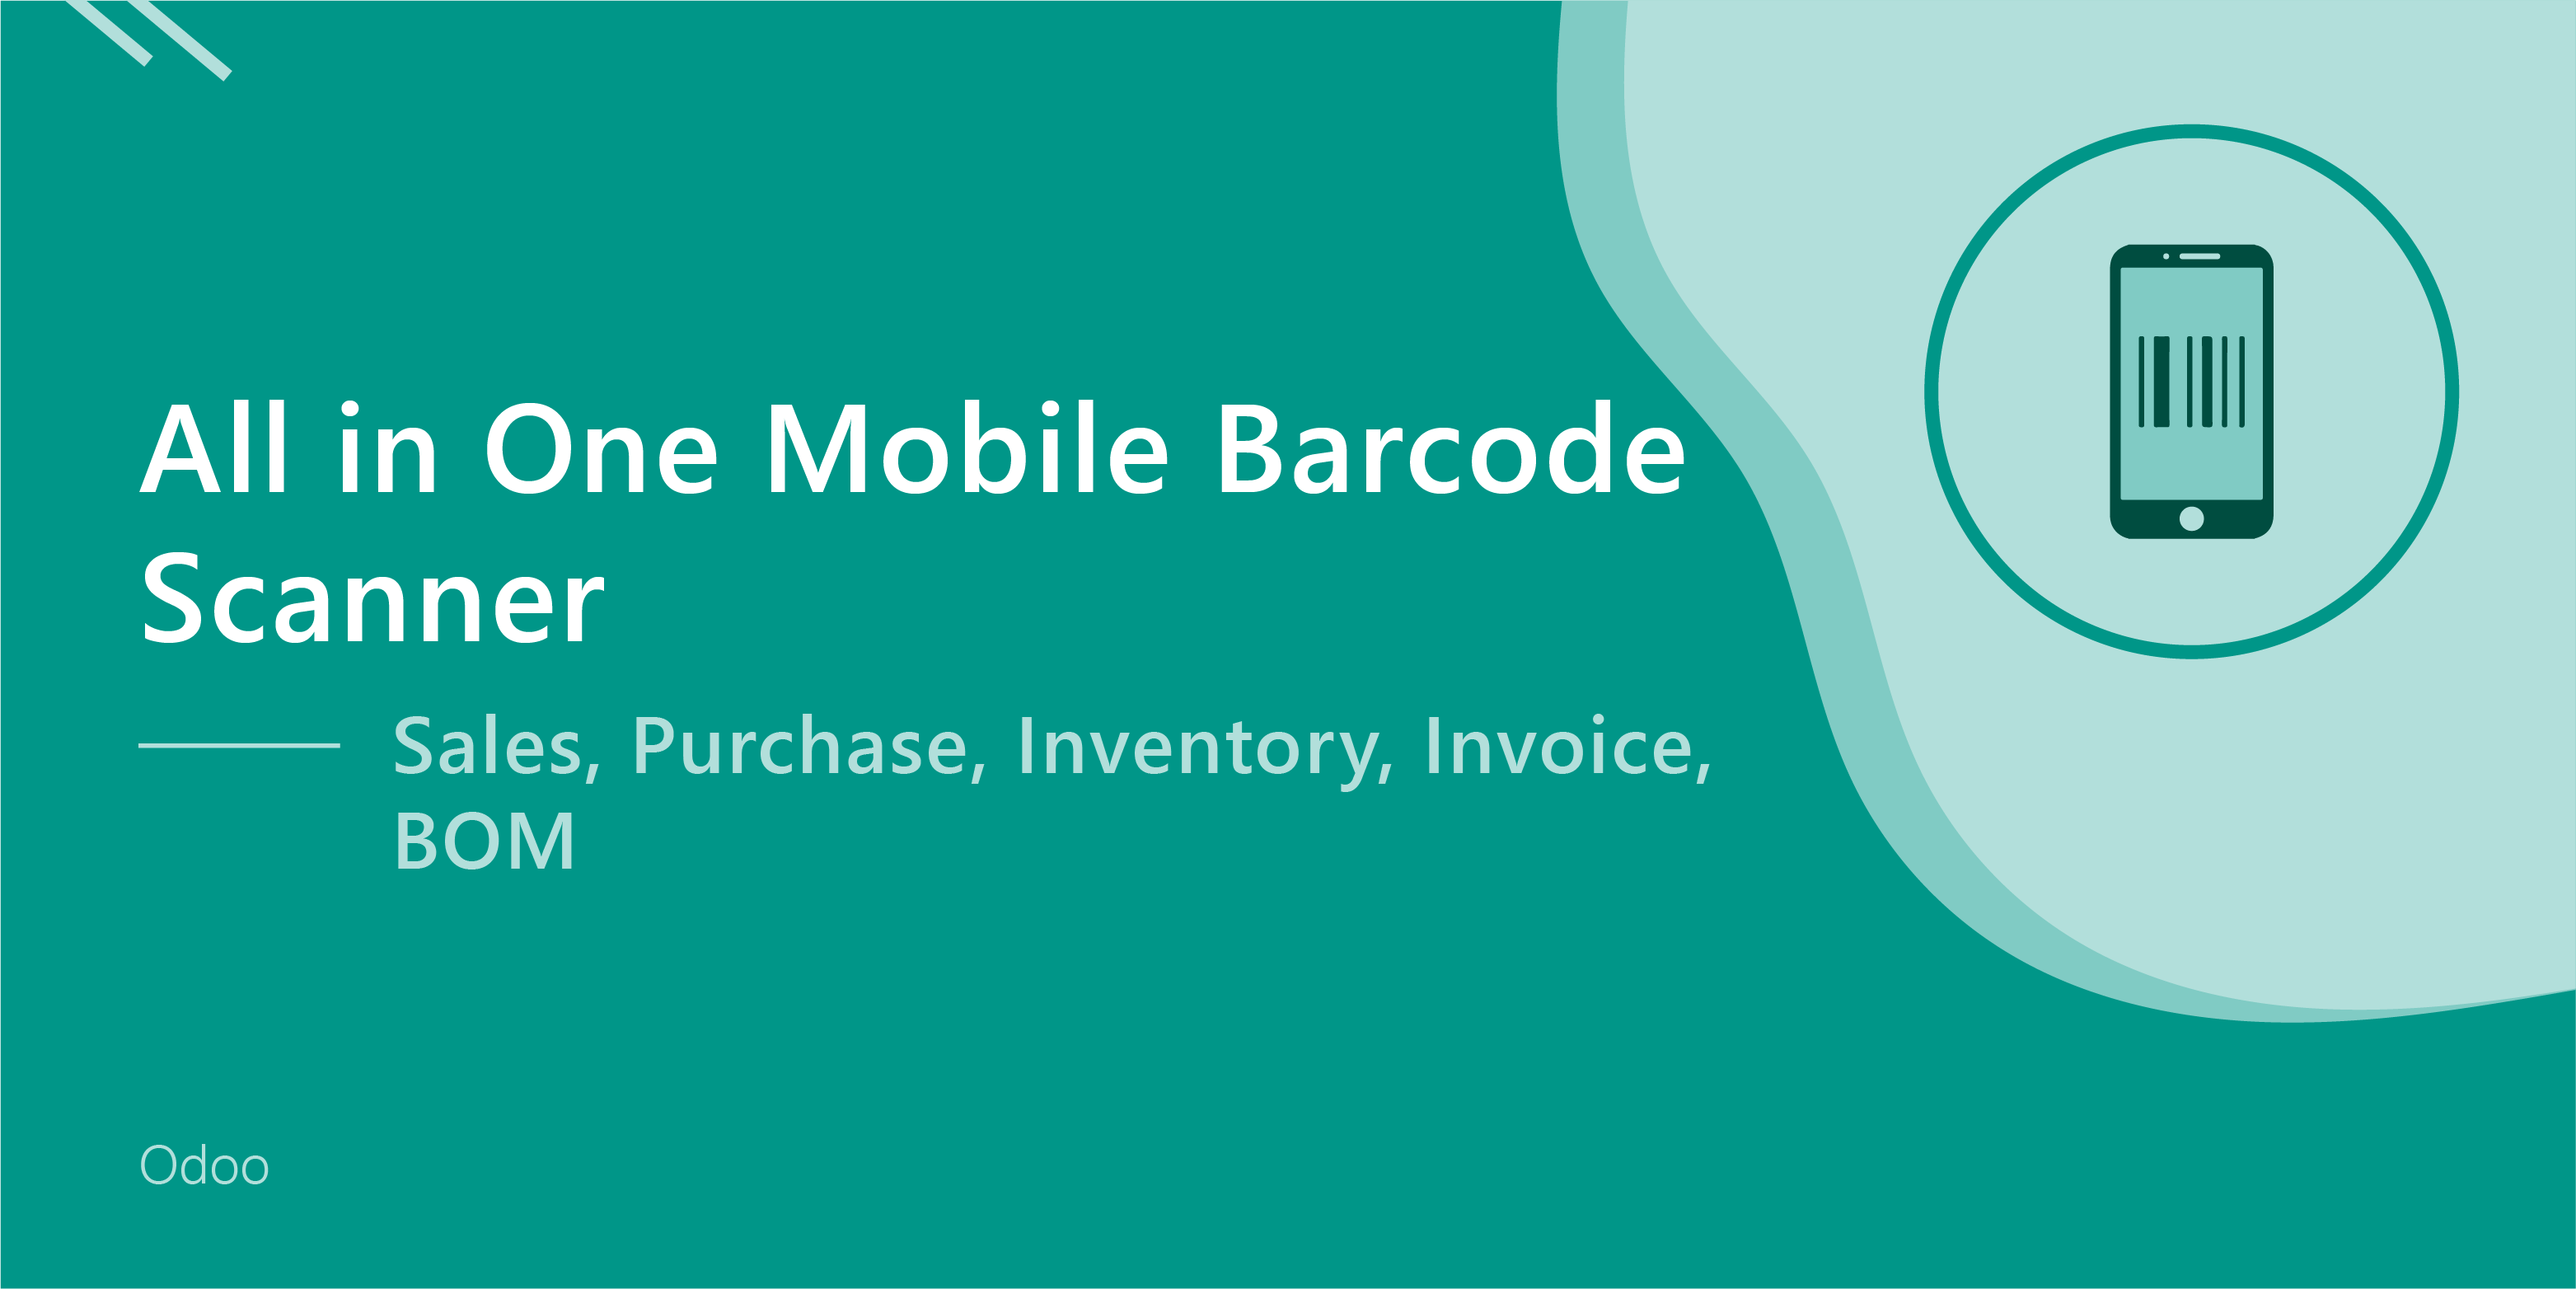 All in One Mobile Barcode